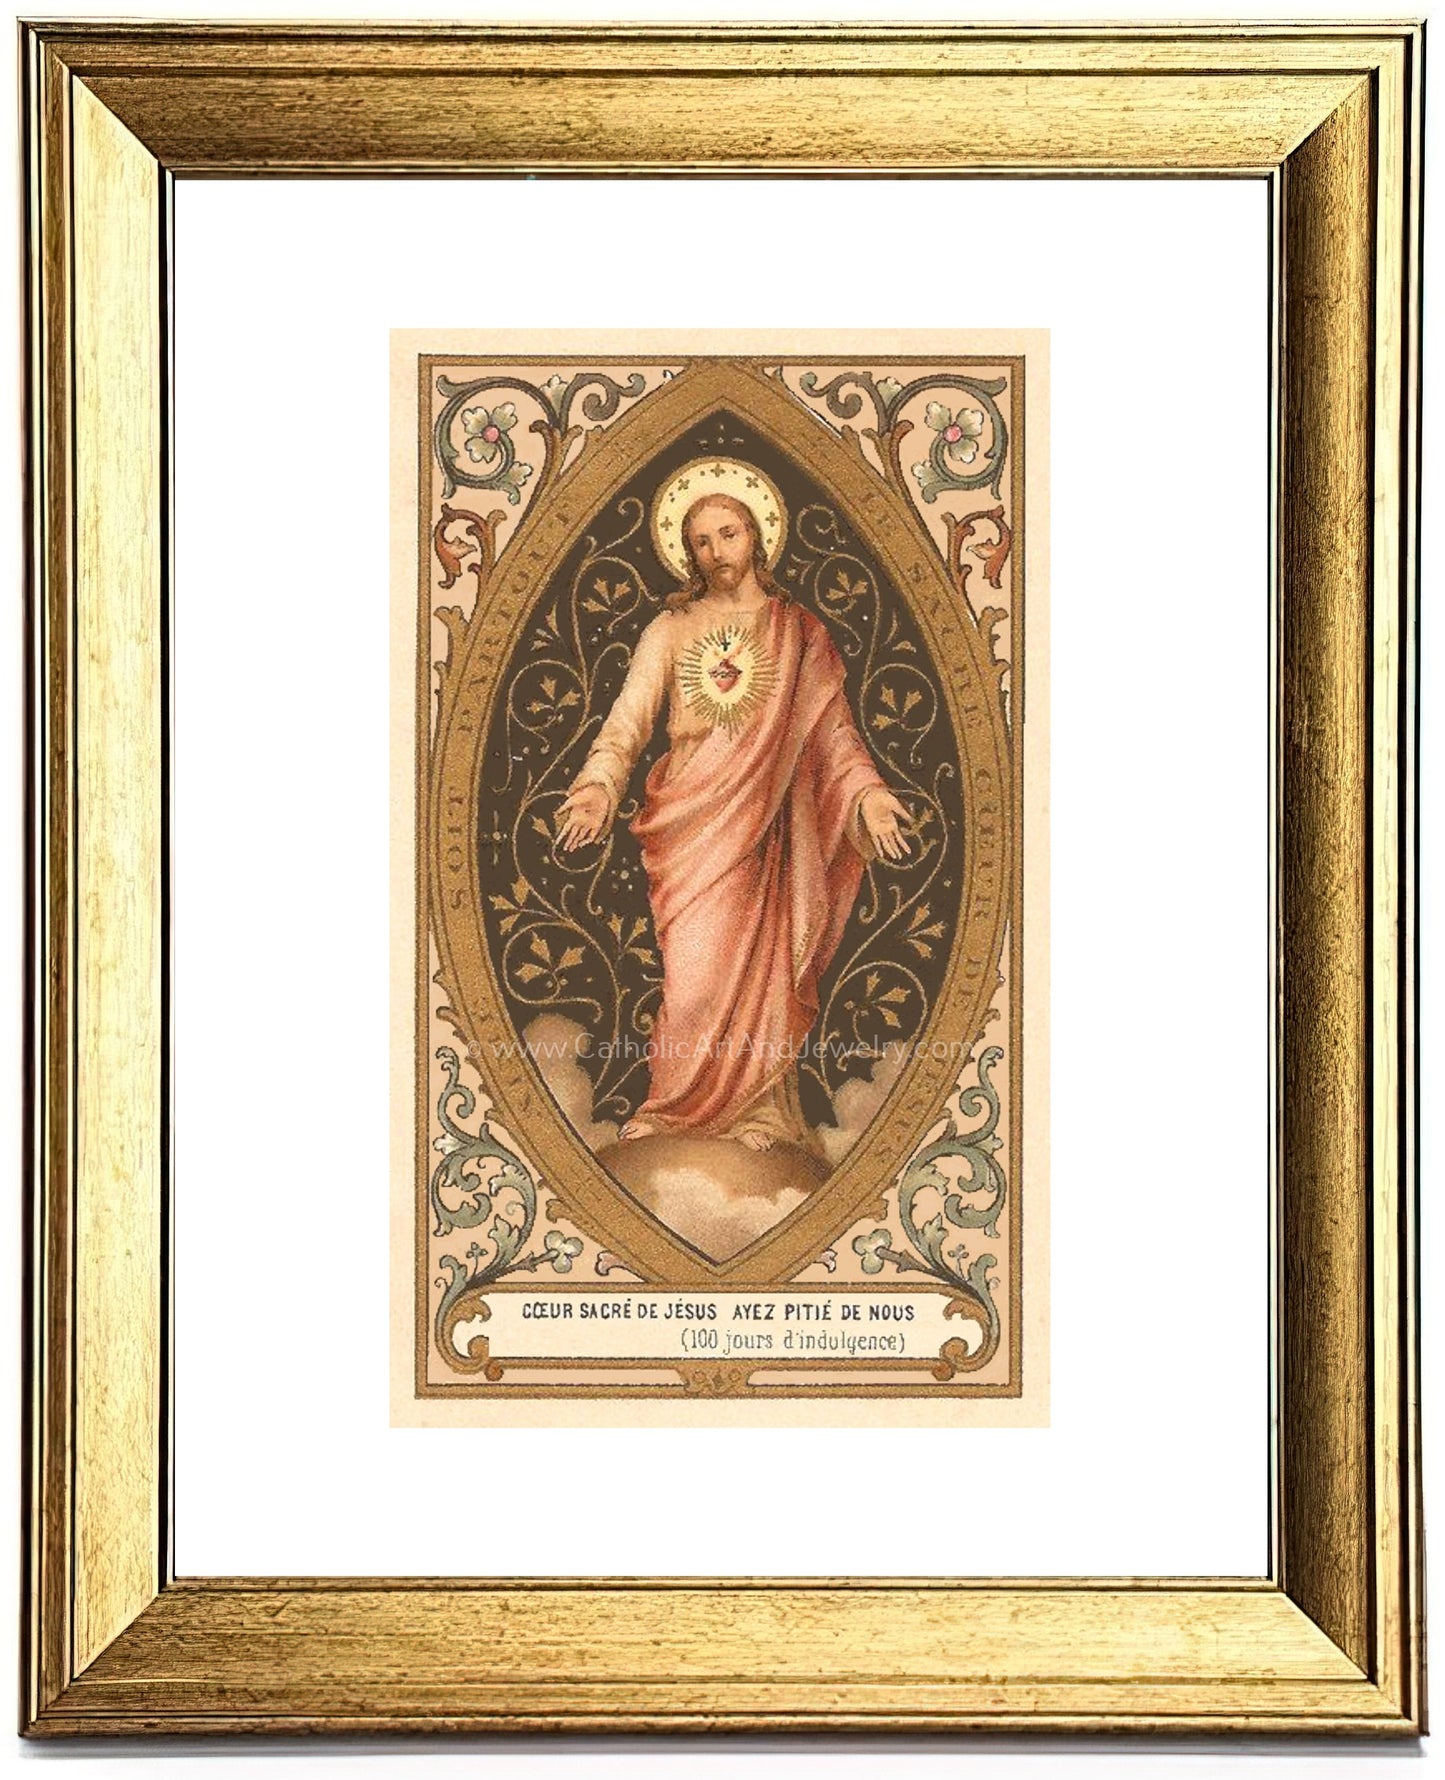 Sacred Heart of Jesus – based on a Vintage French Holy Card – Catholic Art Print – Archival Quality